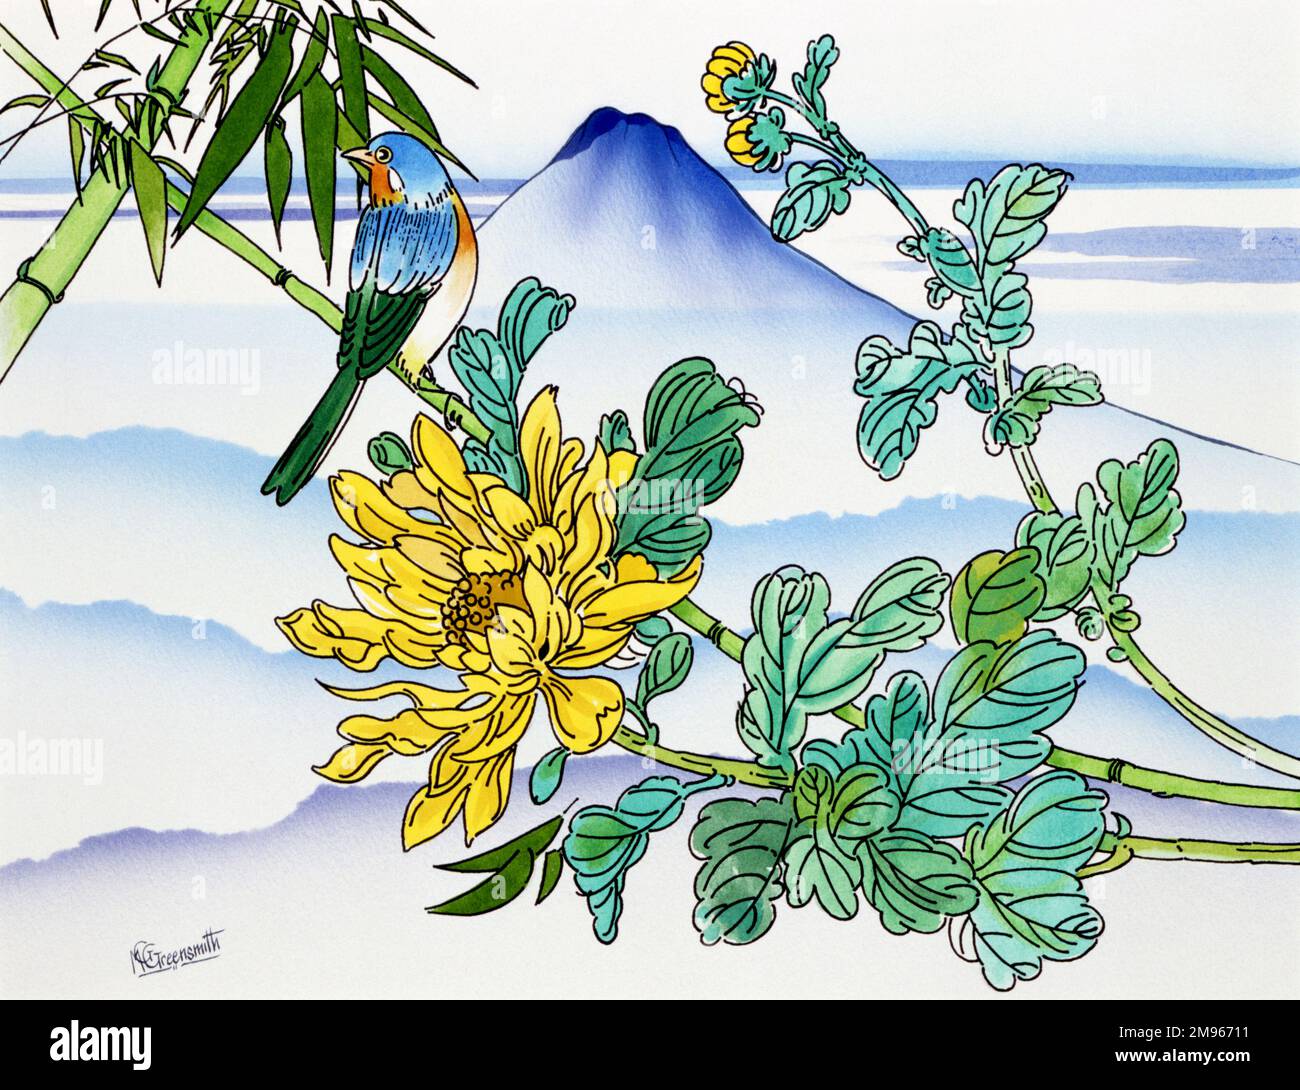 A colourful songbird perched amid the bamboo blossoms in this fantasy Japanese landscape painting by Malcolm Greensmith. The distinctive peak of Mount Fuji dominates the horizon. Stock Photo